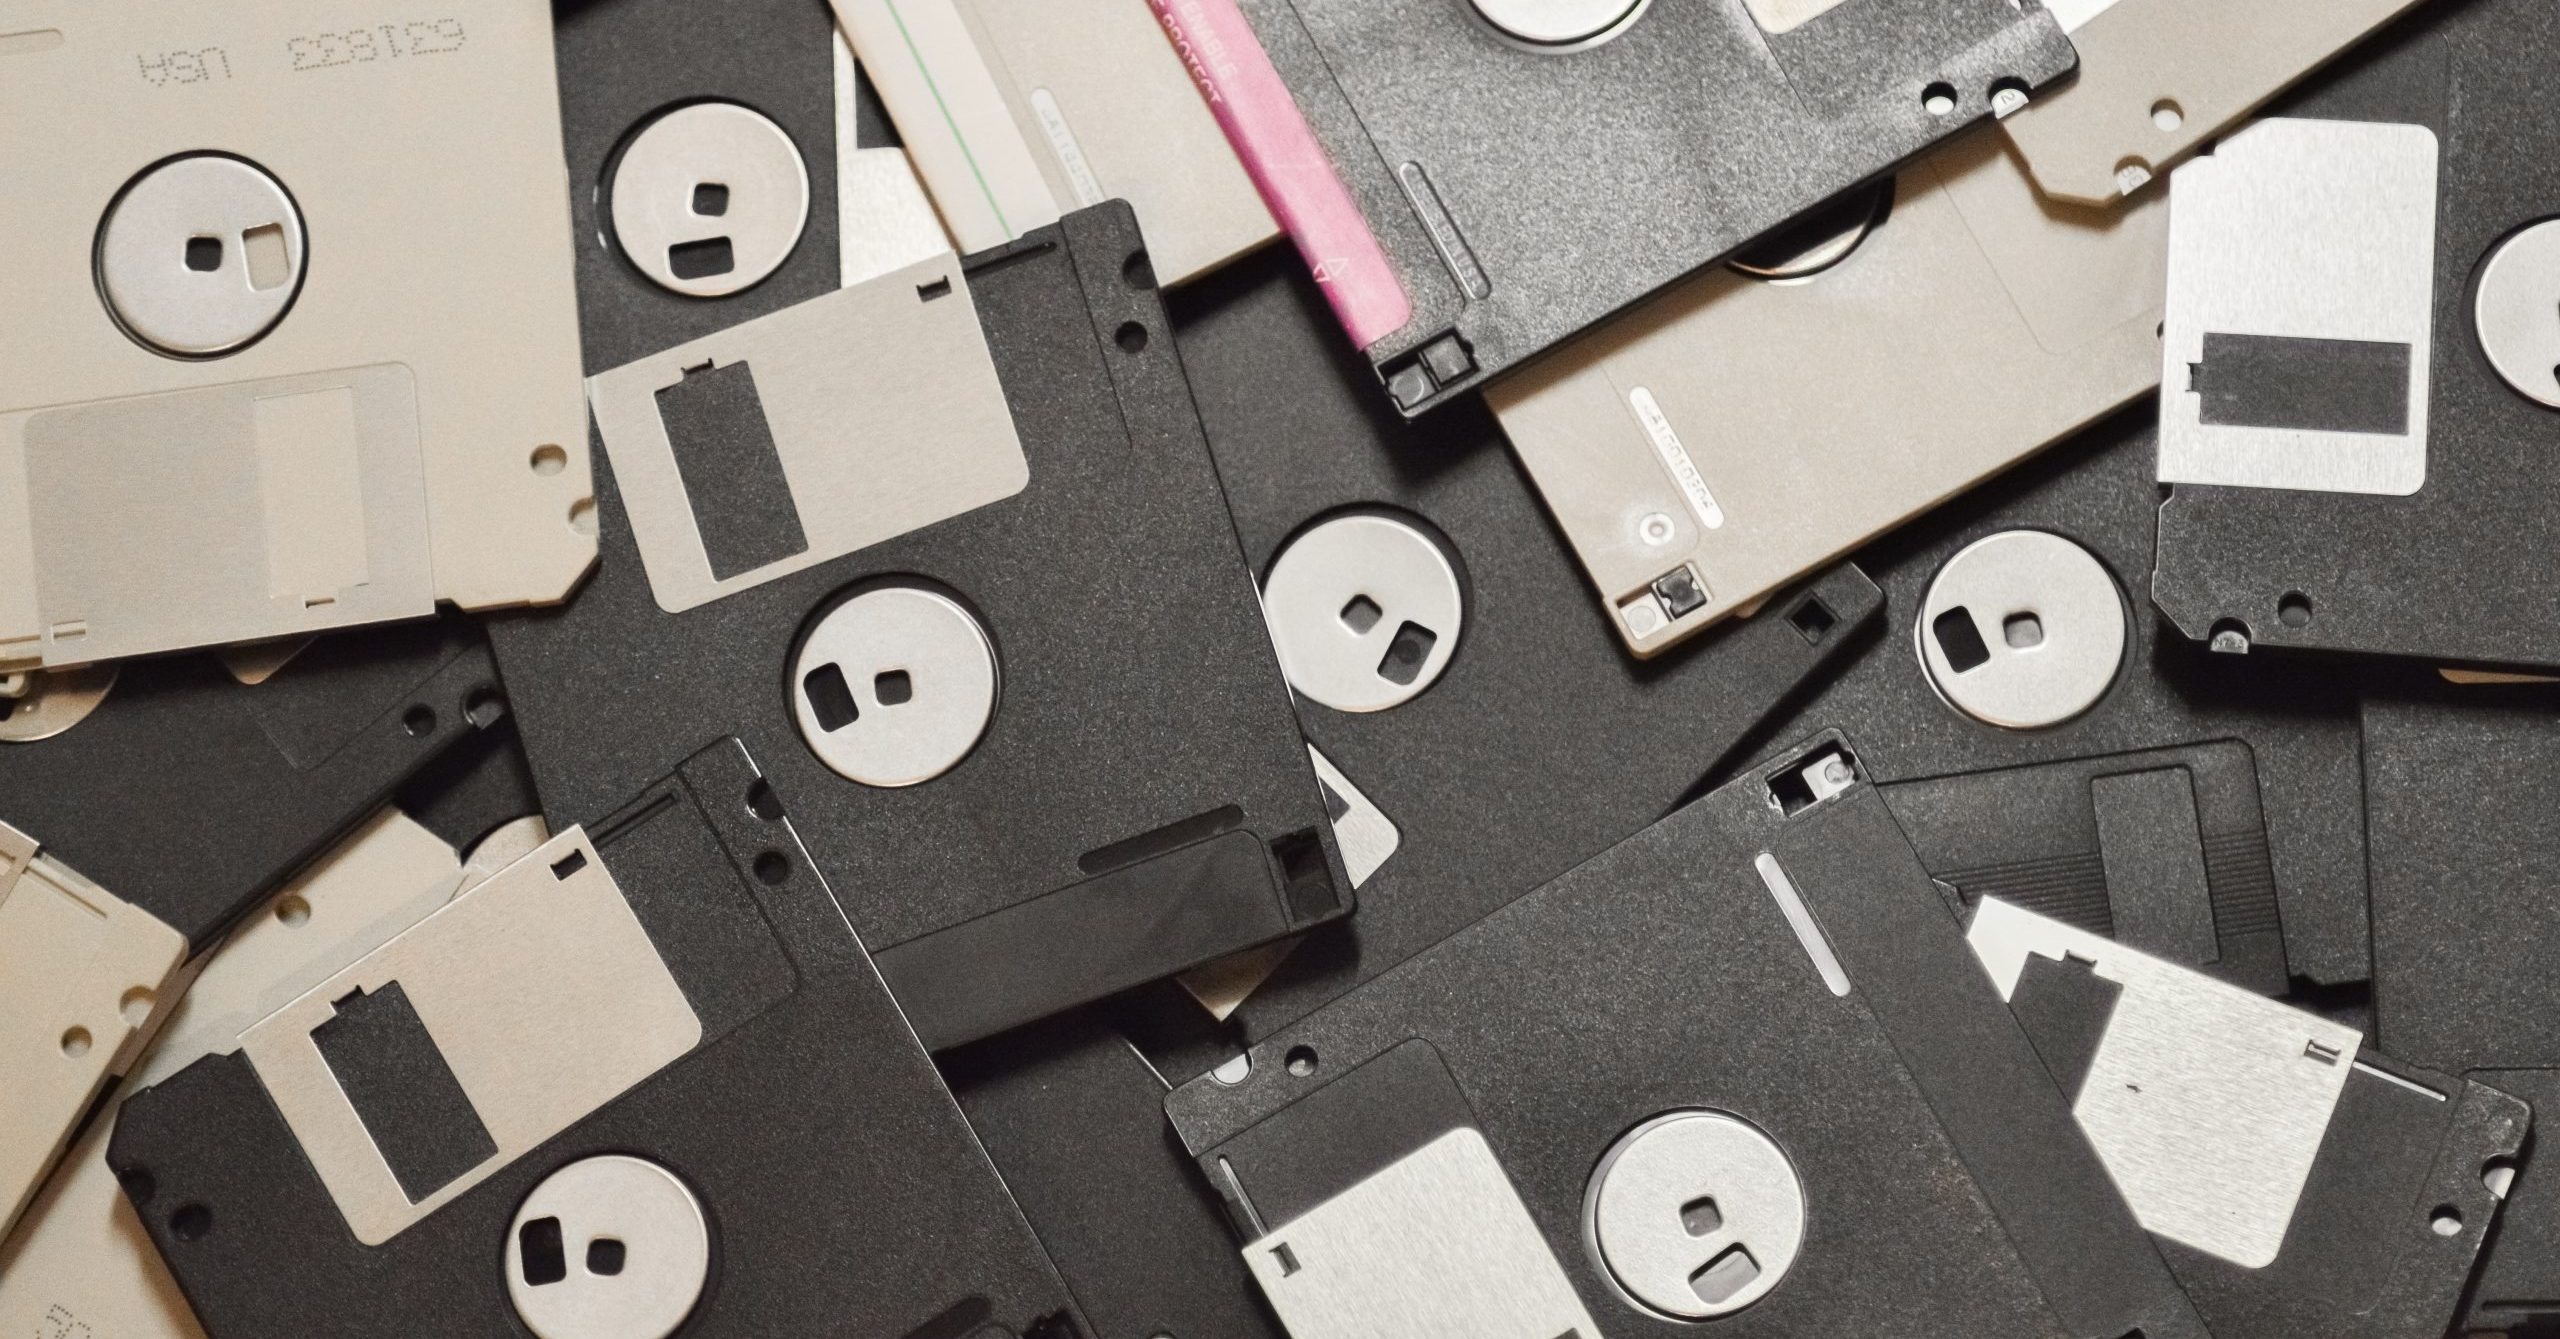 Boing Boing BBS: Data recovered from Gene Roddenberry’s floppies—but what’s on them?